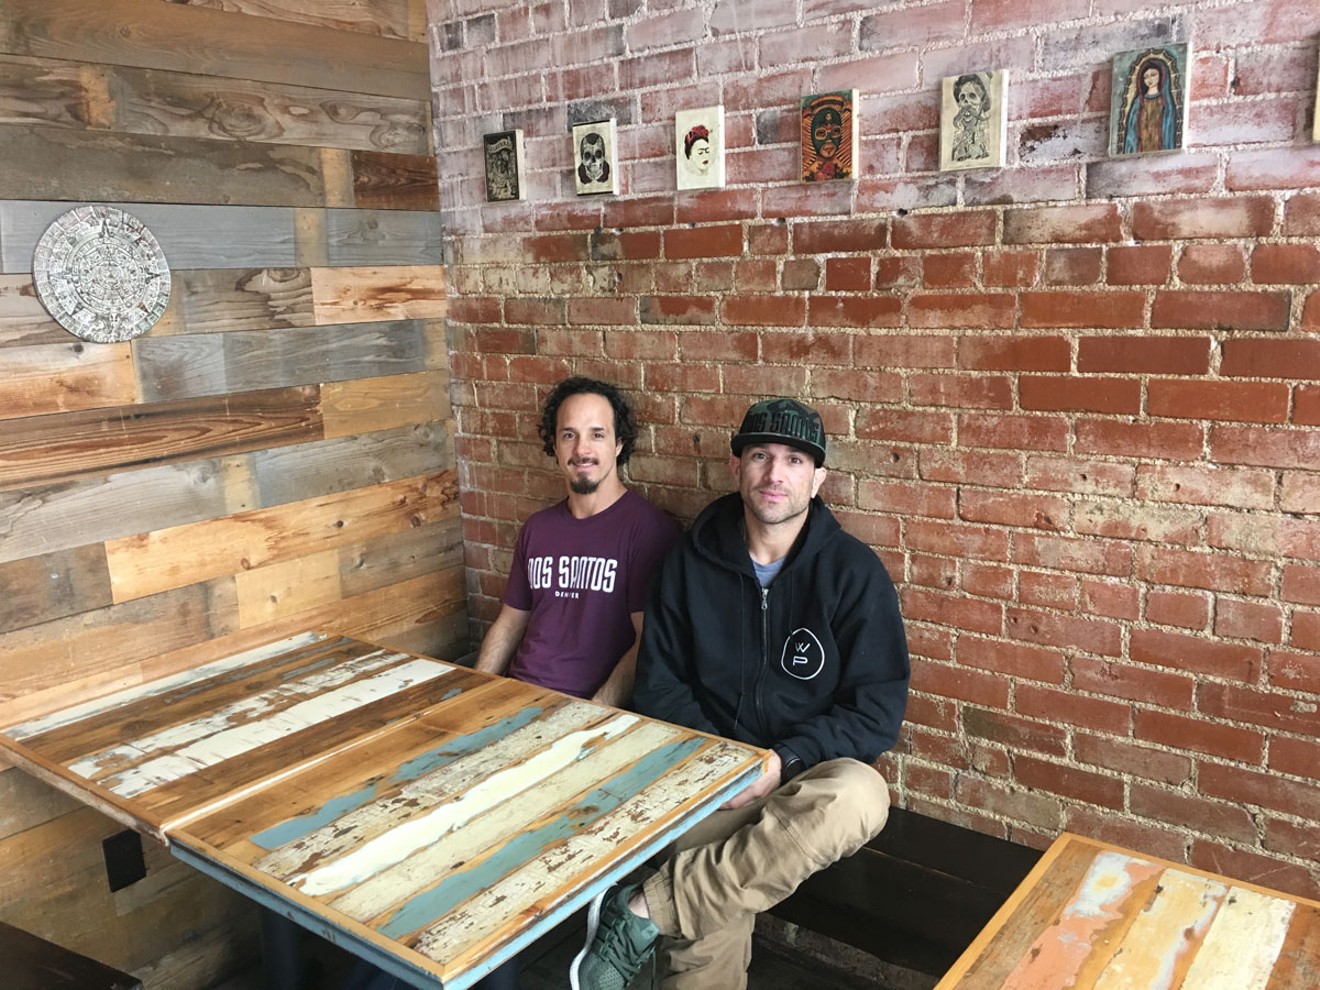 Brothers and Dos Santos partners Kris (left) and Jason Wallenta will open a family-oriented pizzeria next month.